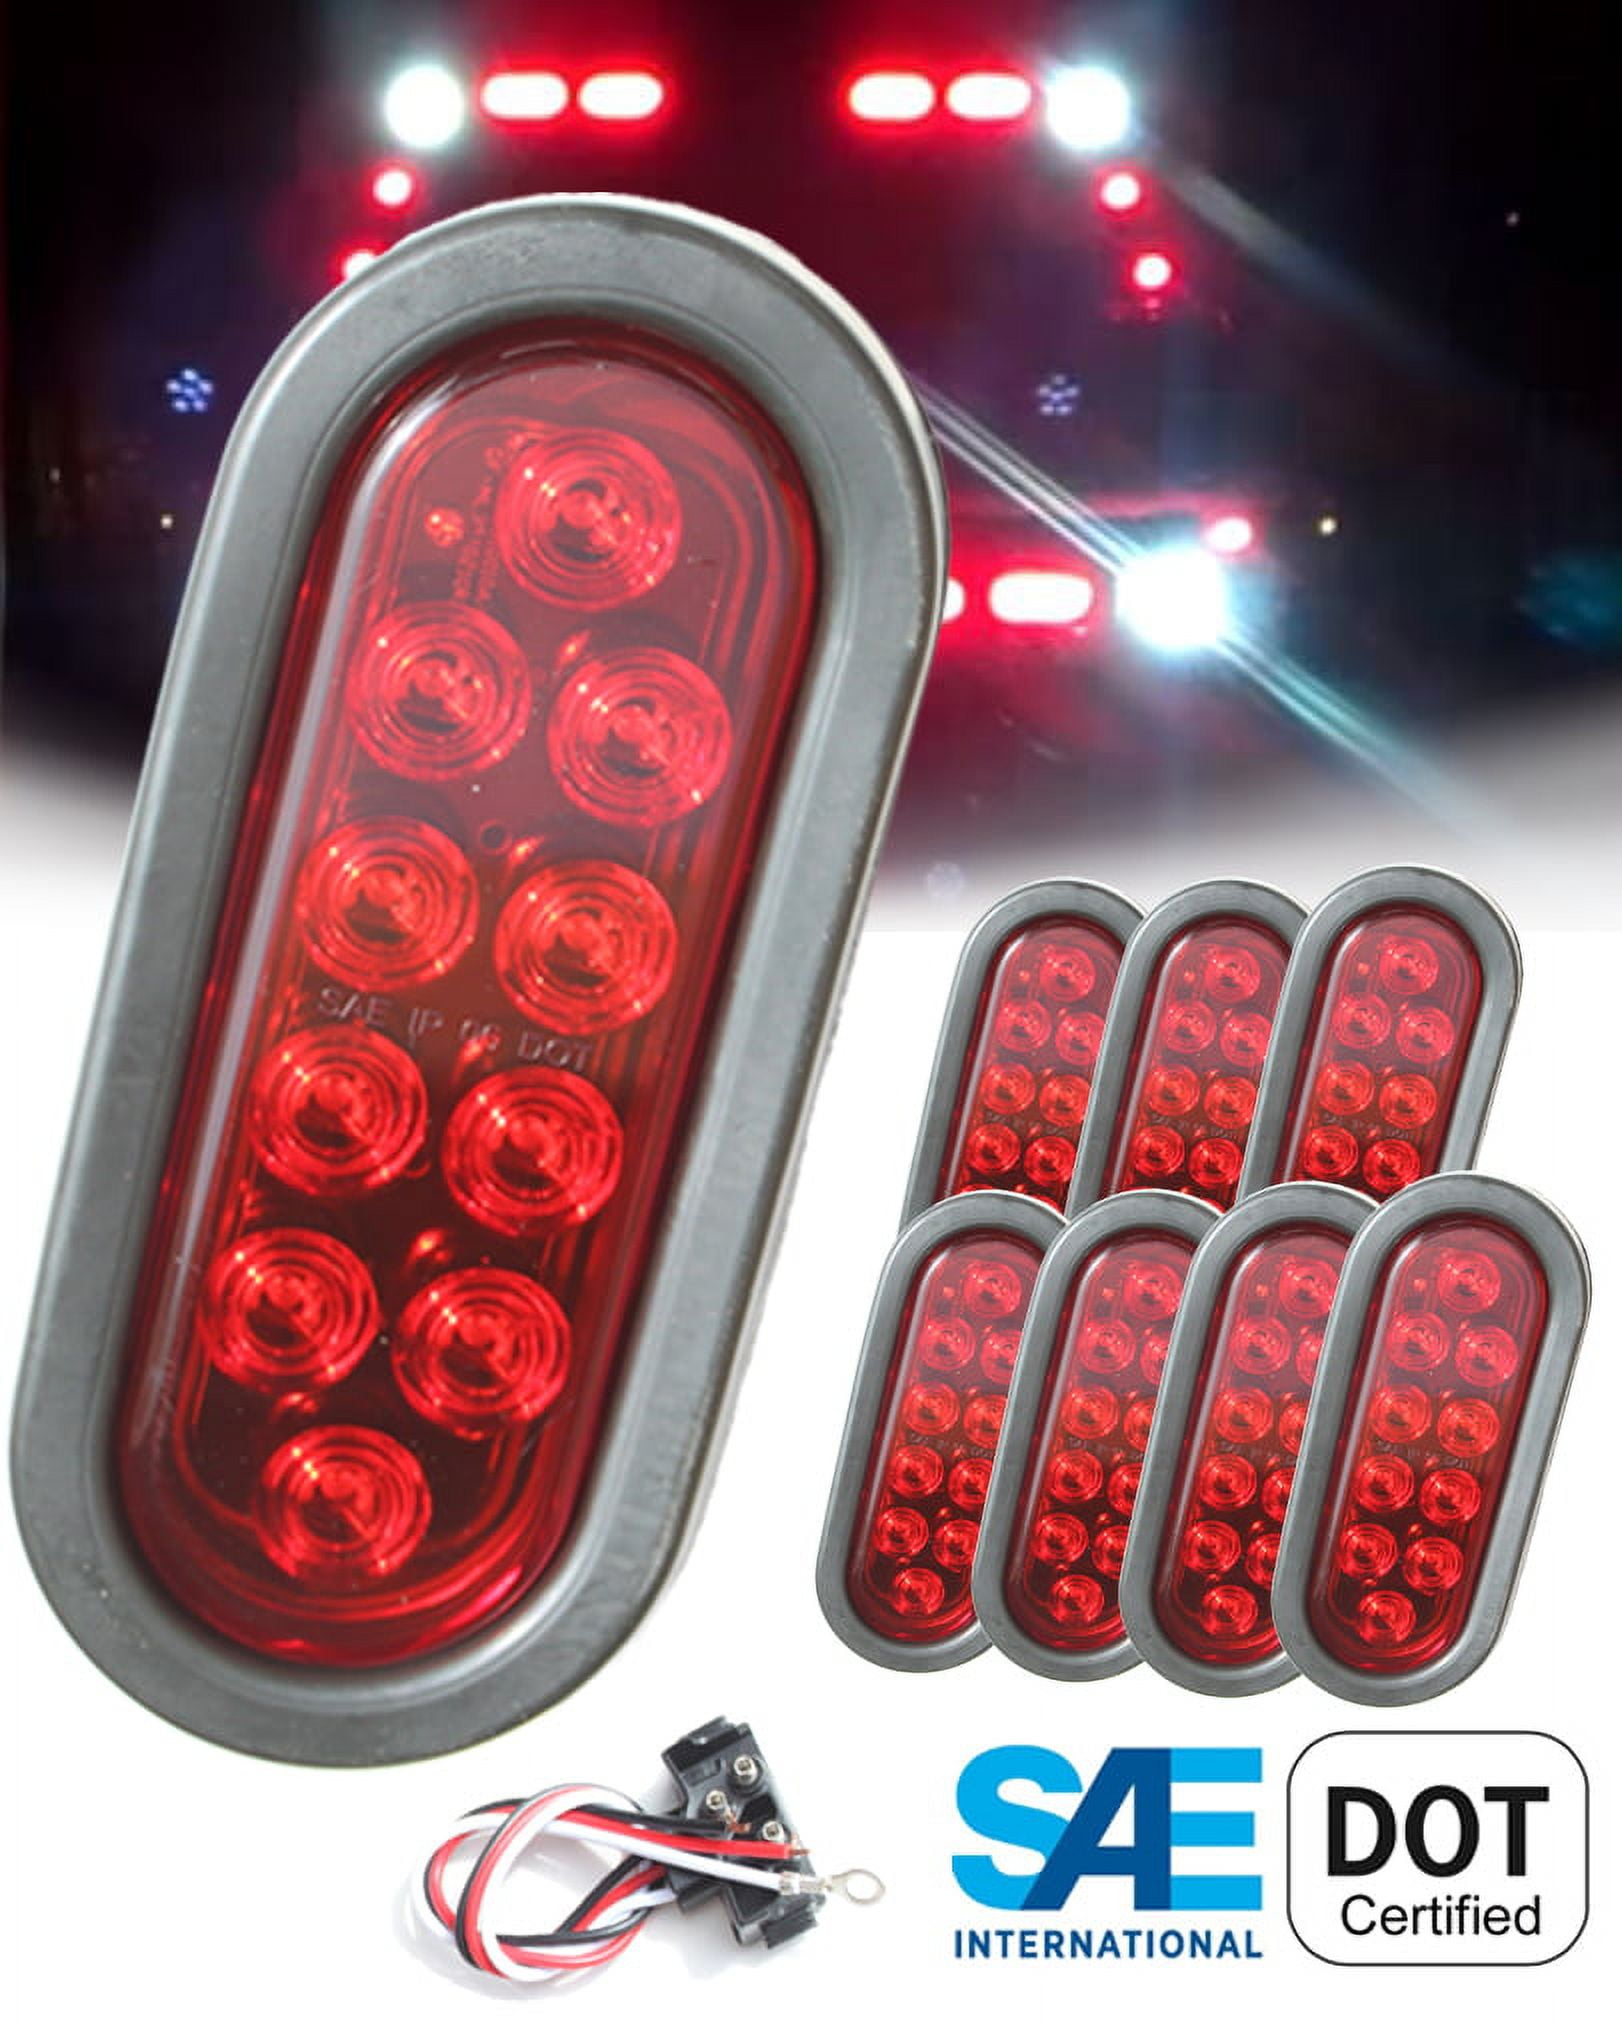 XXXXX Set of 8 Pcs LED 6 Oval Red Brake Stop Turn Tail Marker Signal  Lights for Truck Trailer Tractor w Grommet Pigtail Kit DOT SAE Approved -  Walmart.com